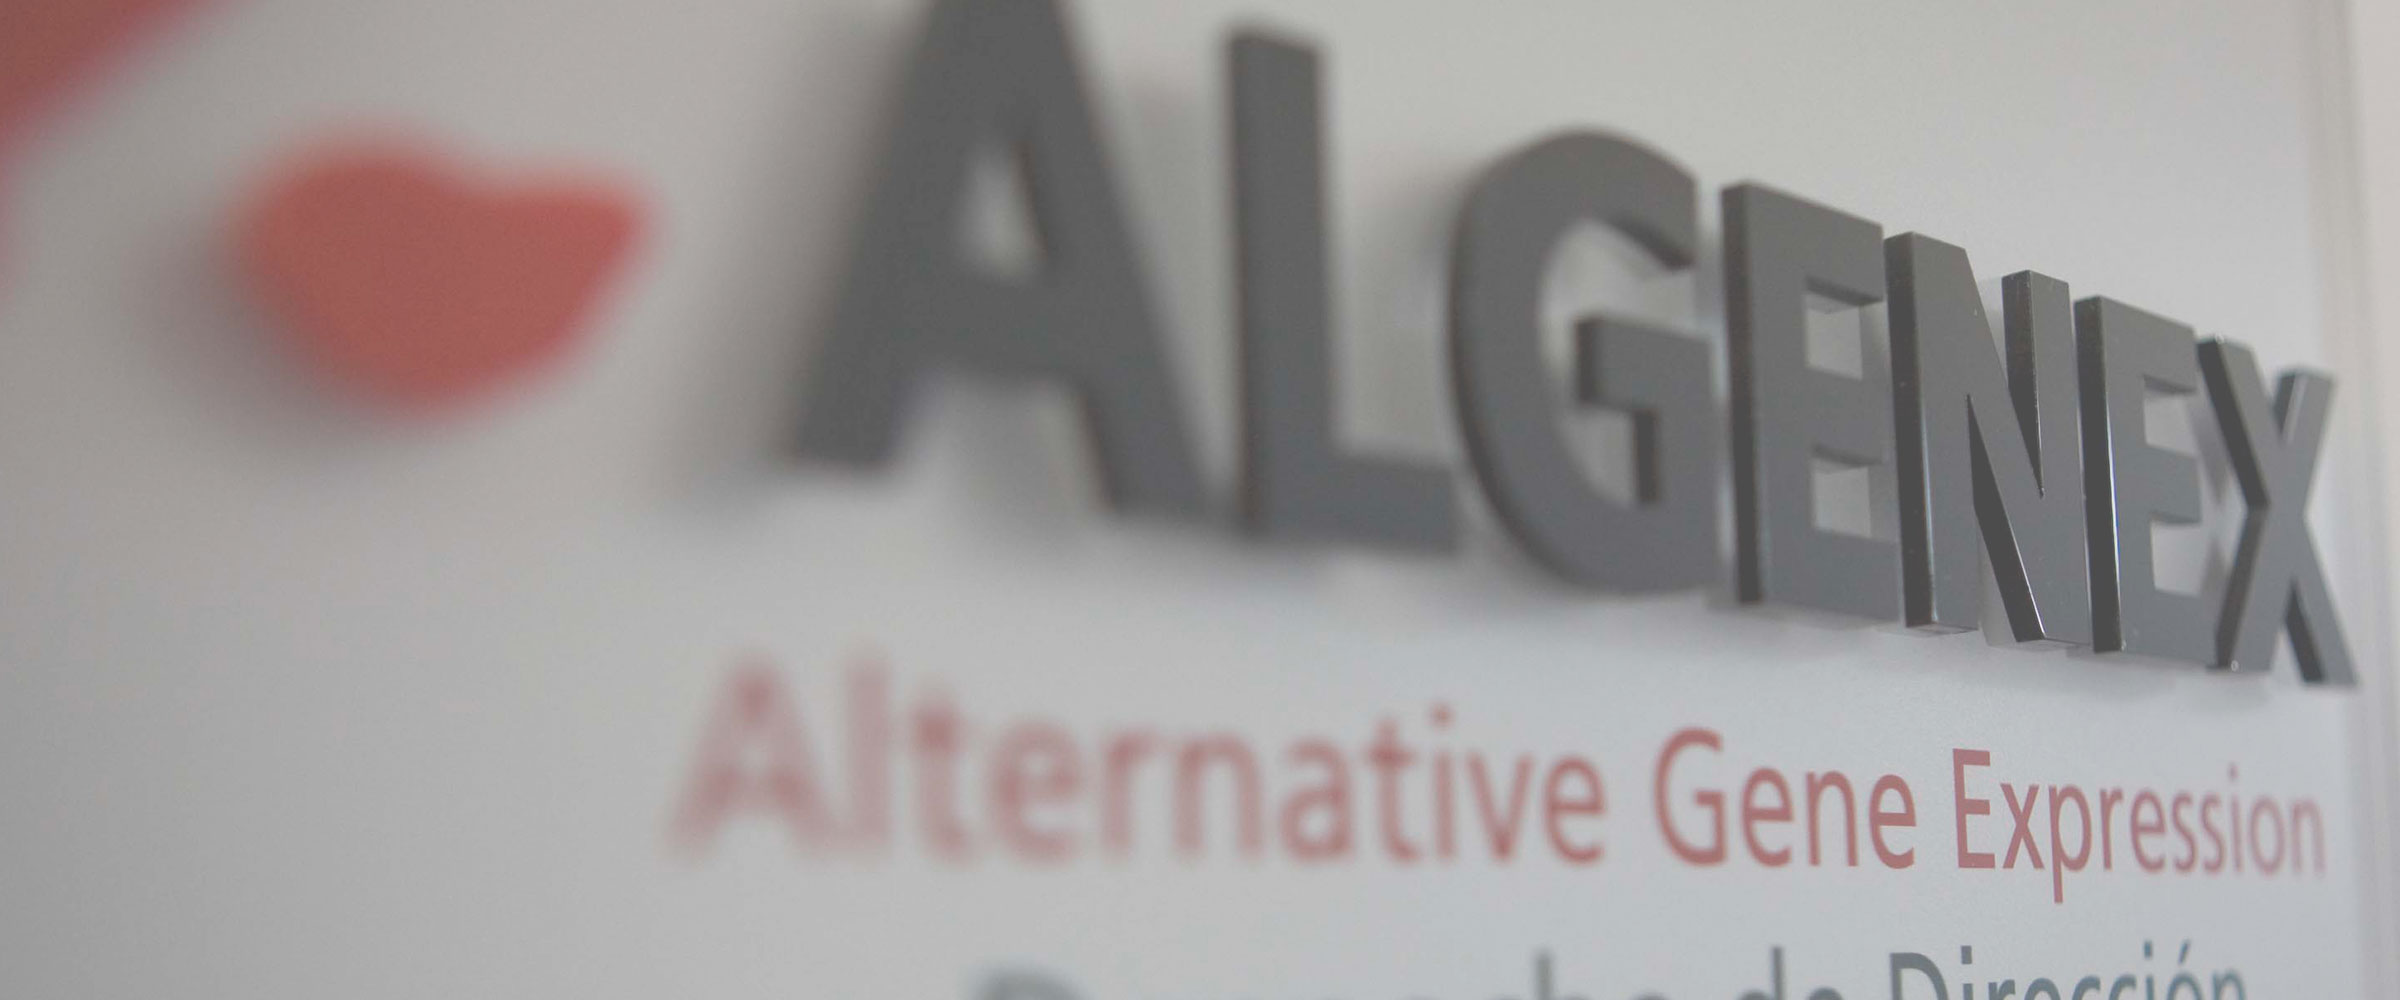 ALGENEX has signed its first commercial license agreement with FATRO